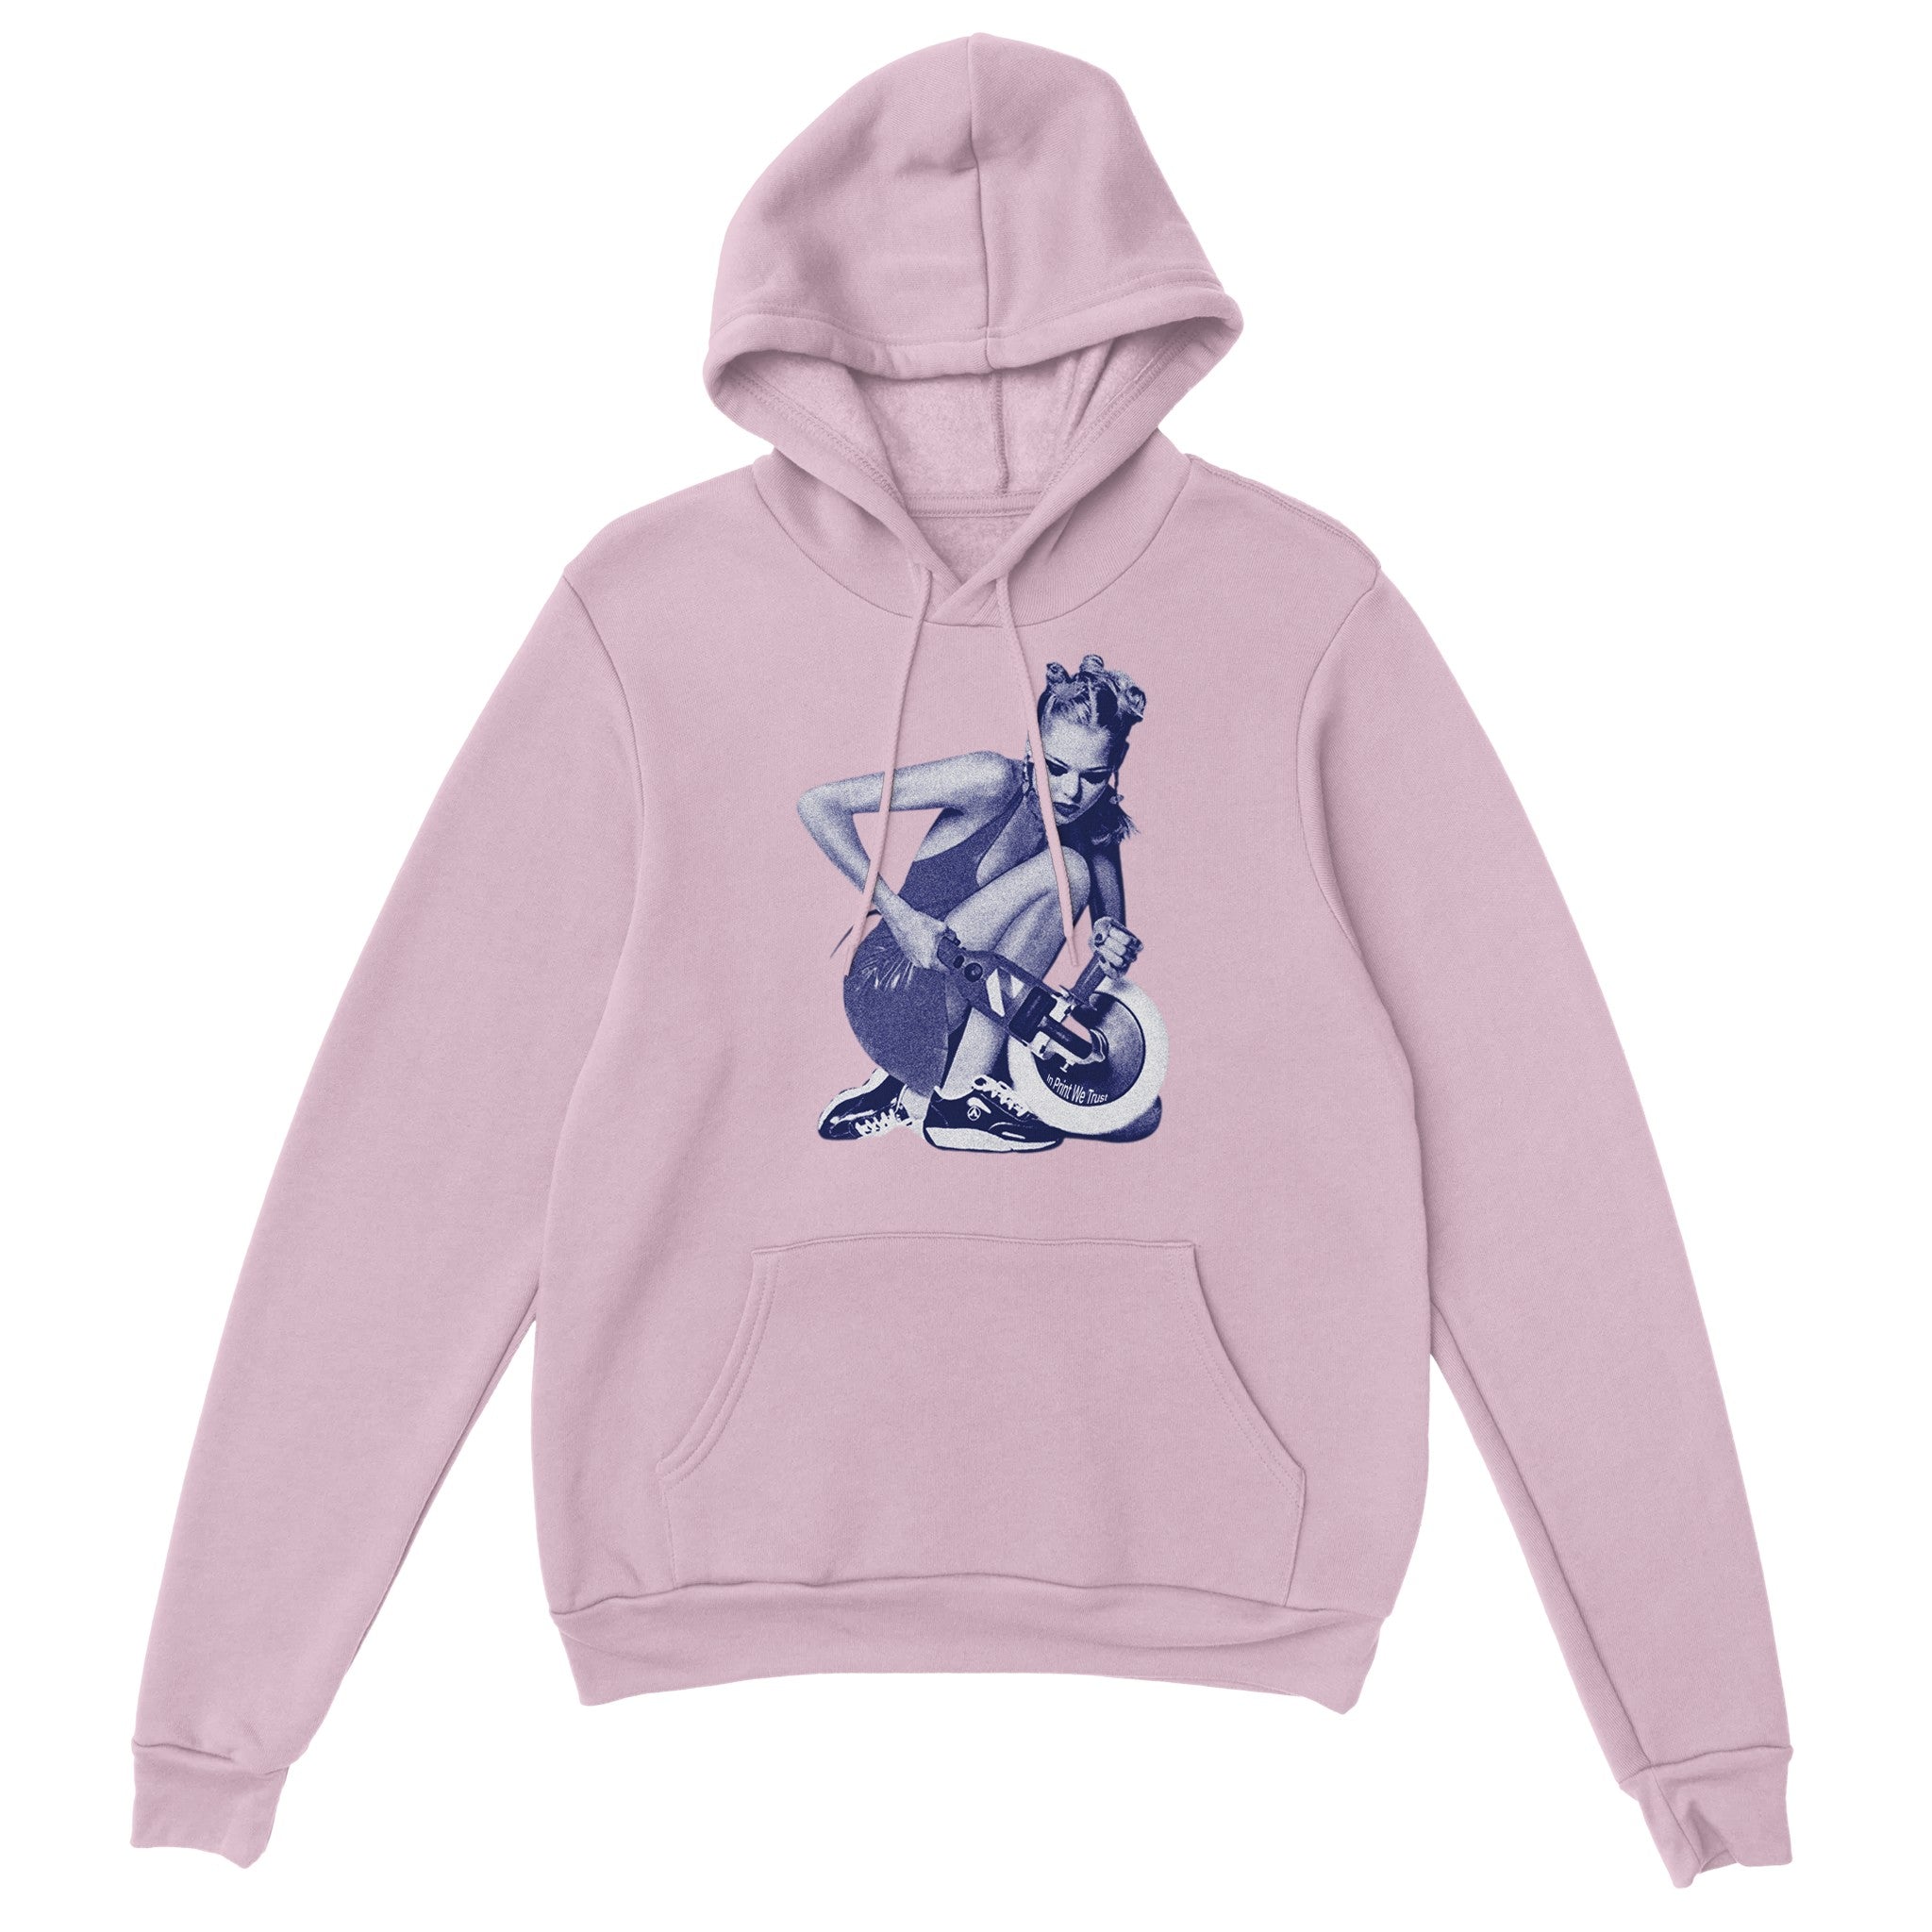 'Chainsaw' hoodie - In Print We Trust